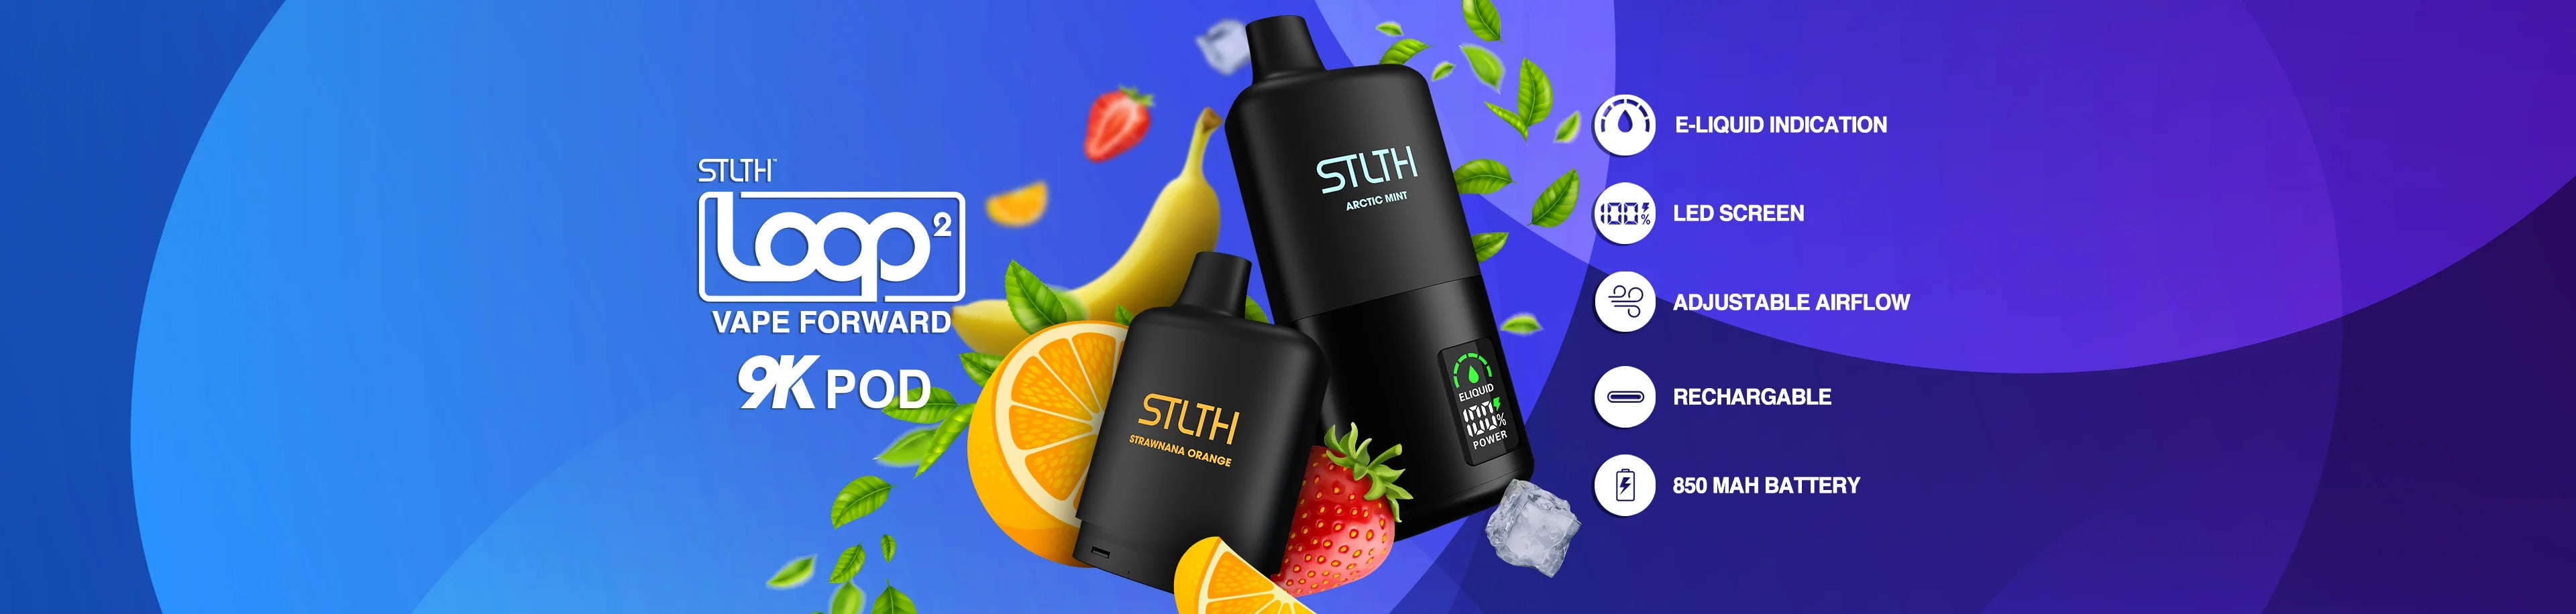 Stlth Loop 9K Pods - Canada and Quebec Free Vape Shipping